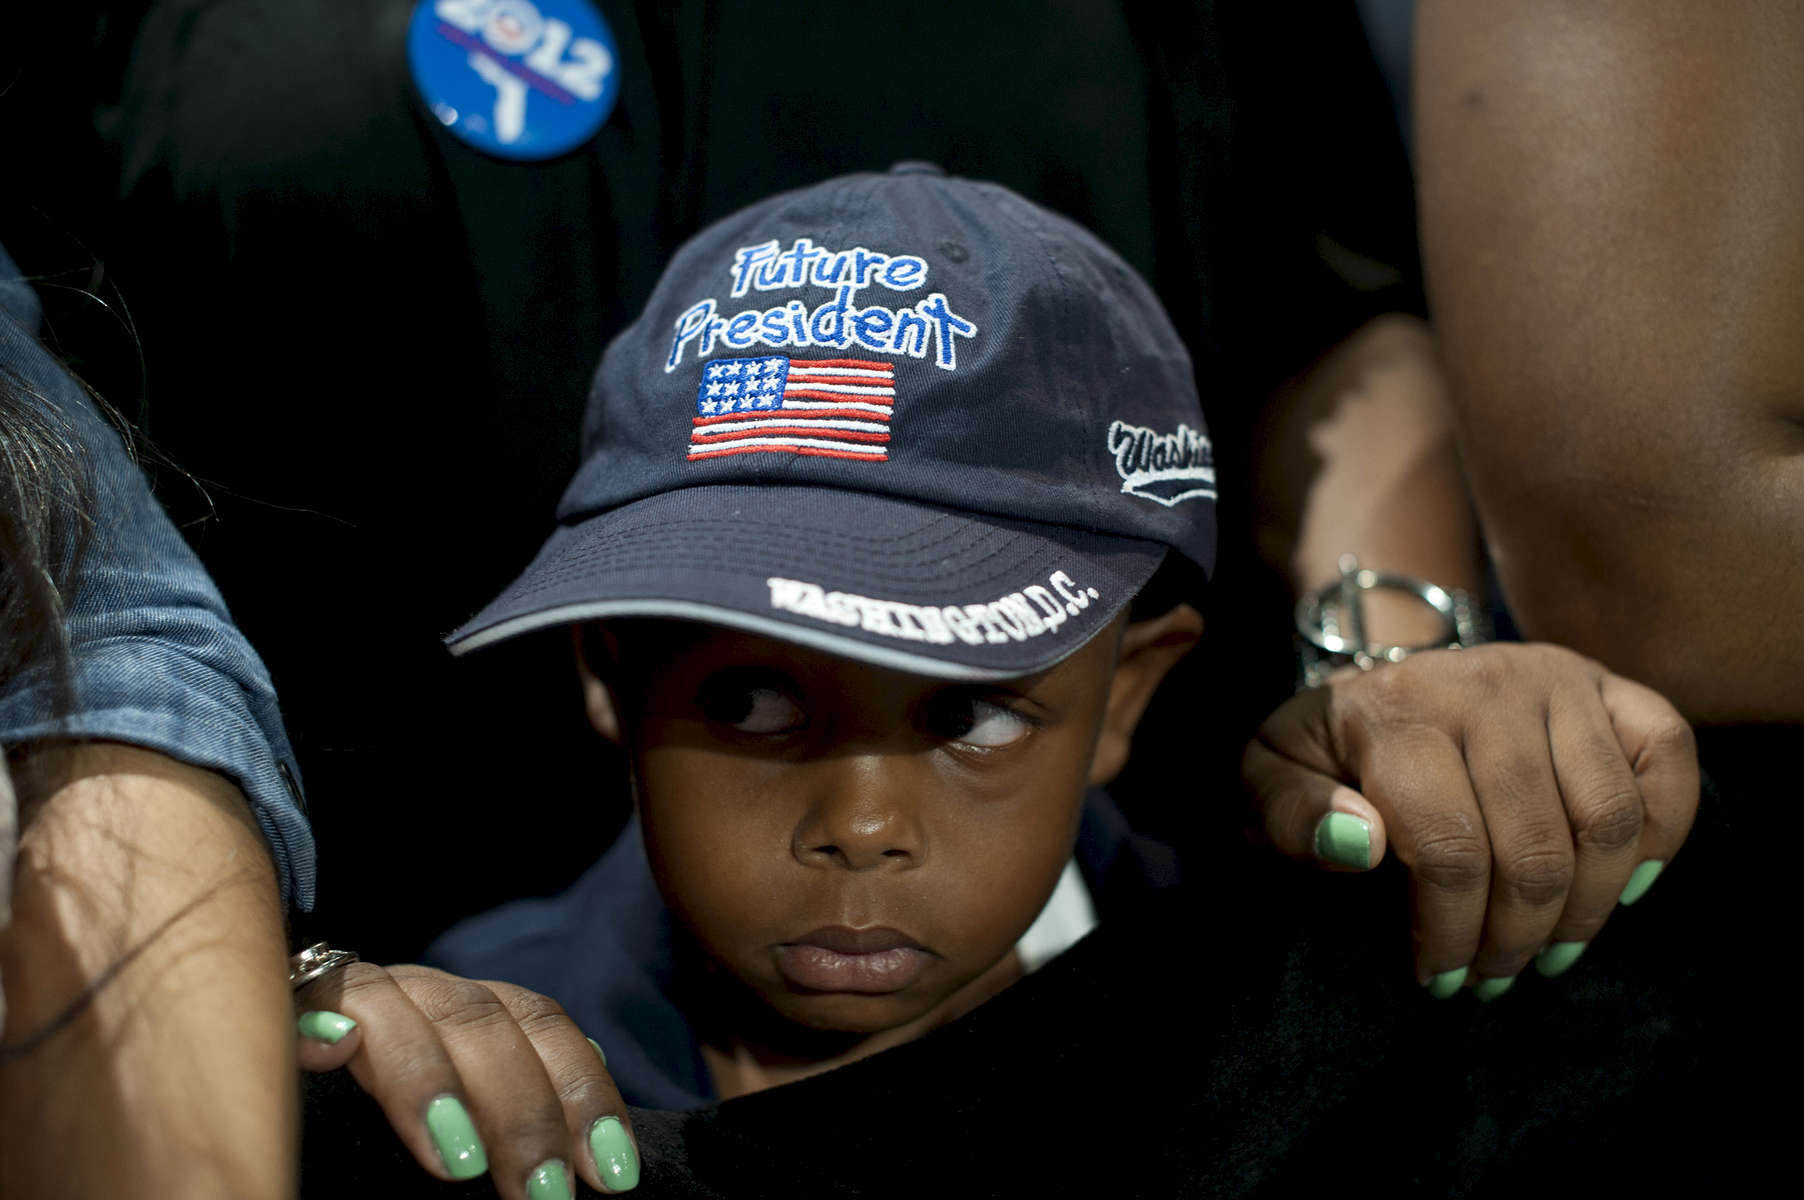 September 9, 2012 - West Palm Beach, FL: A young boy wearing a hat  declaring him a {quote}Future President{quote} listens to current President Barack Obama speak at a campaign event in West Palm Beach, FL. (Scout Tufankjian for Obama for America/Polaris)